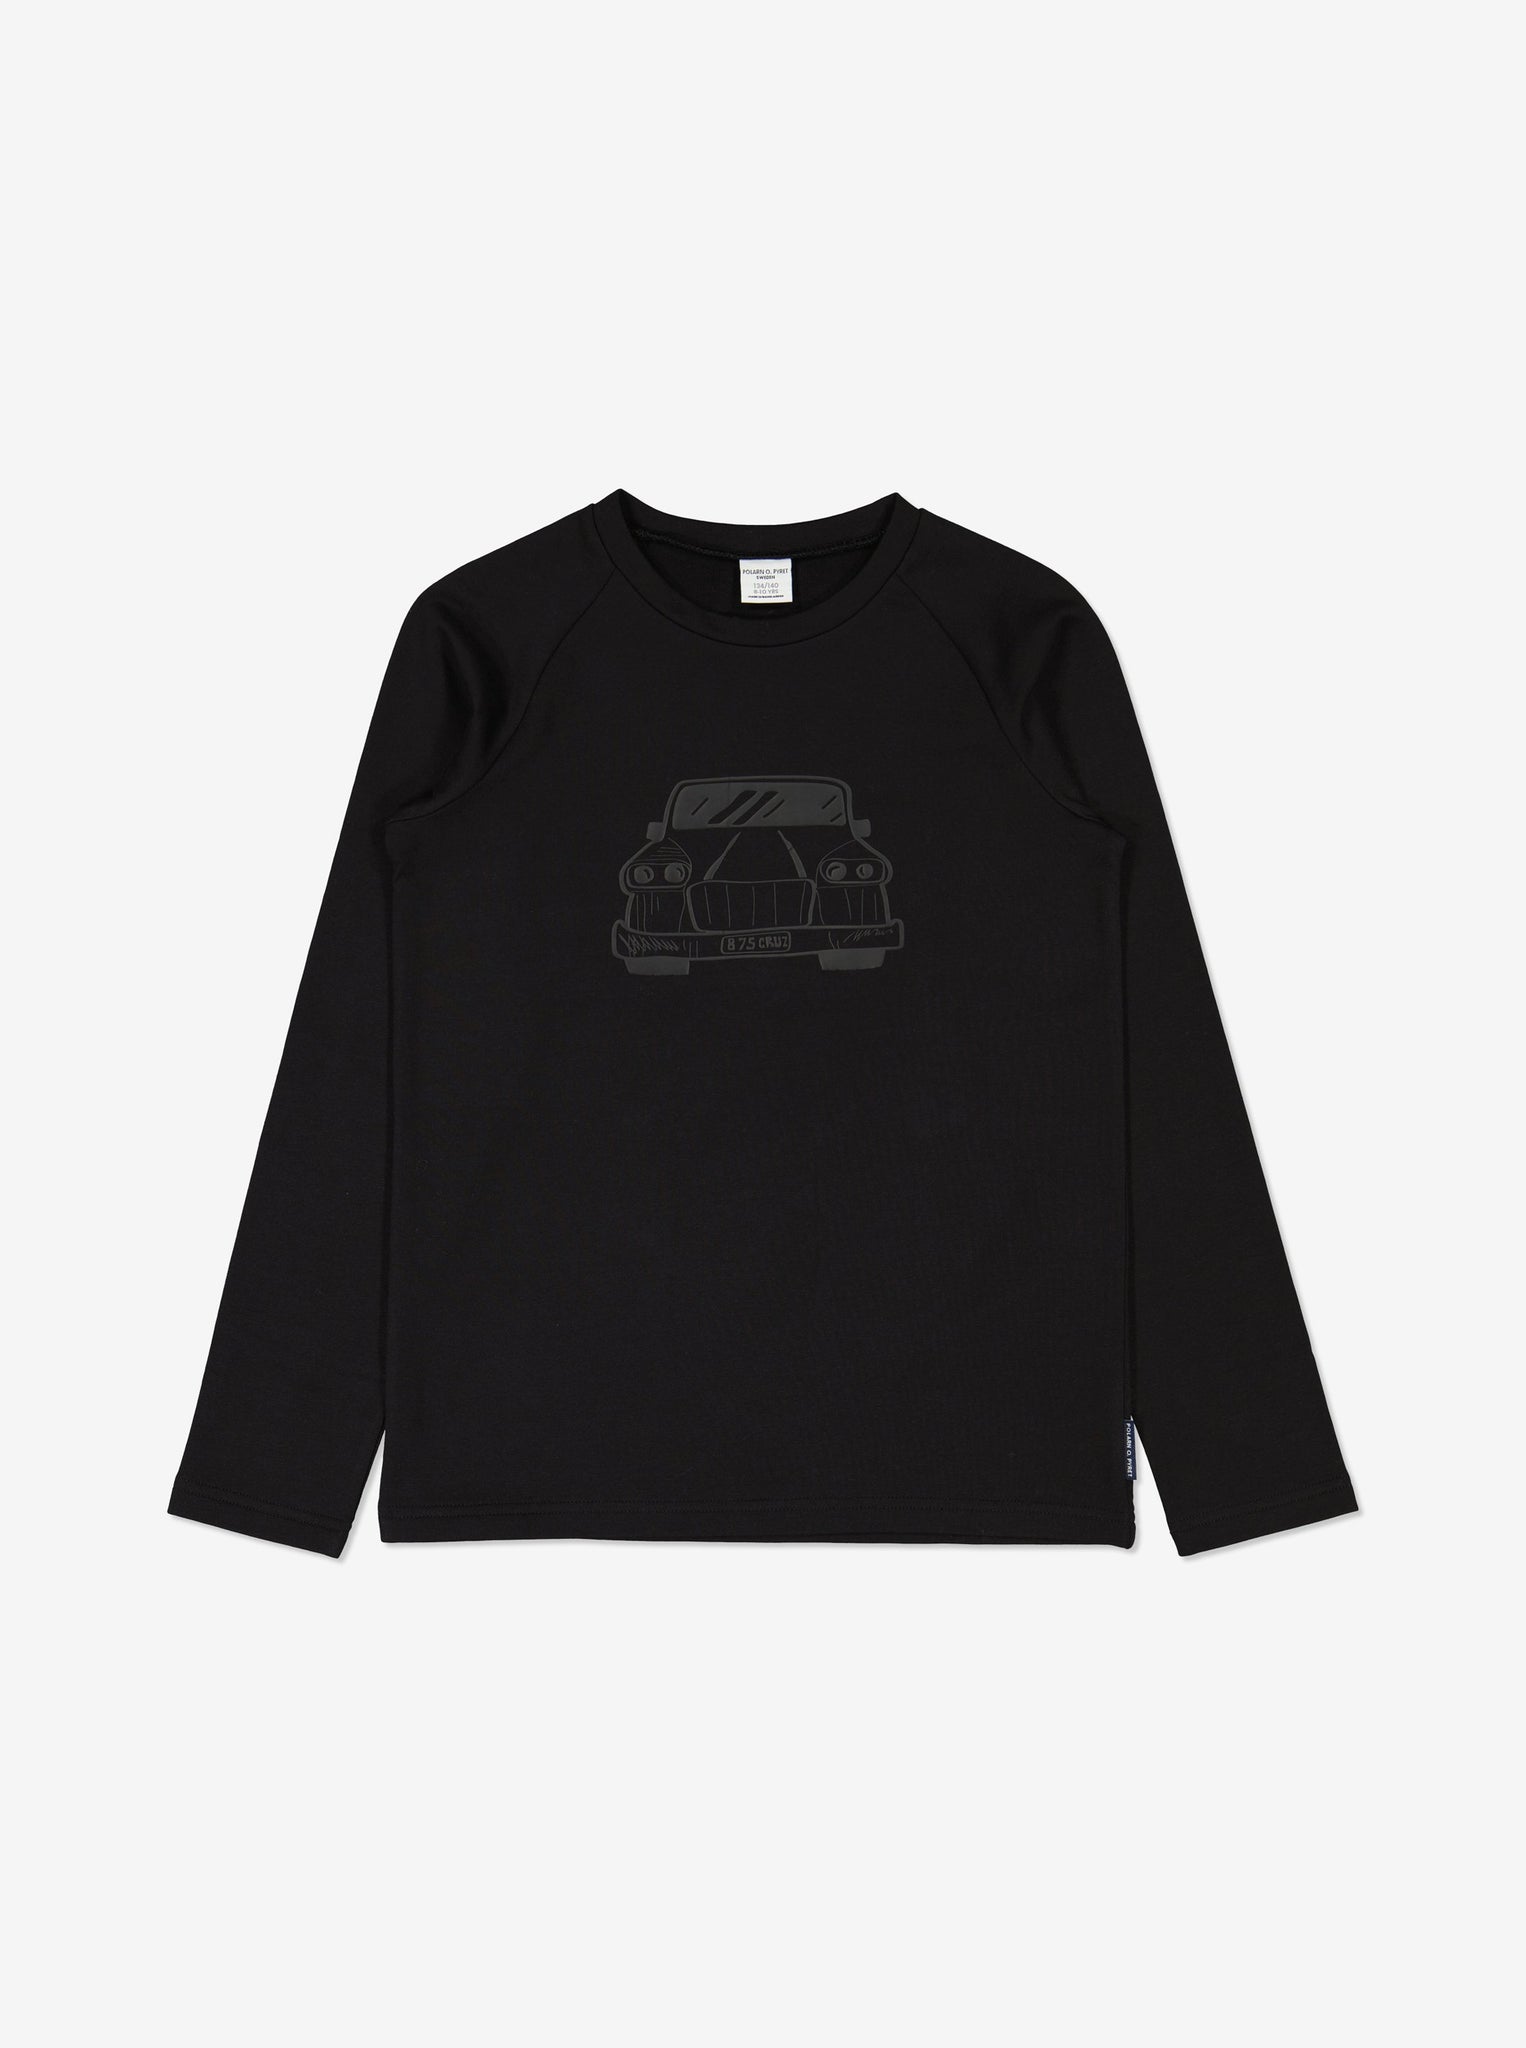  Organic Black Car Kids Sweatshirt from Polarn O. Pyret Kidswear. Made from sustainable materials.